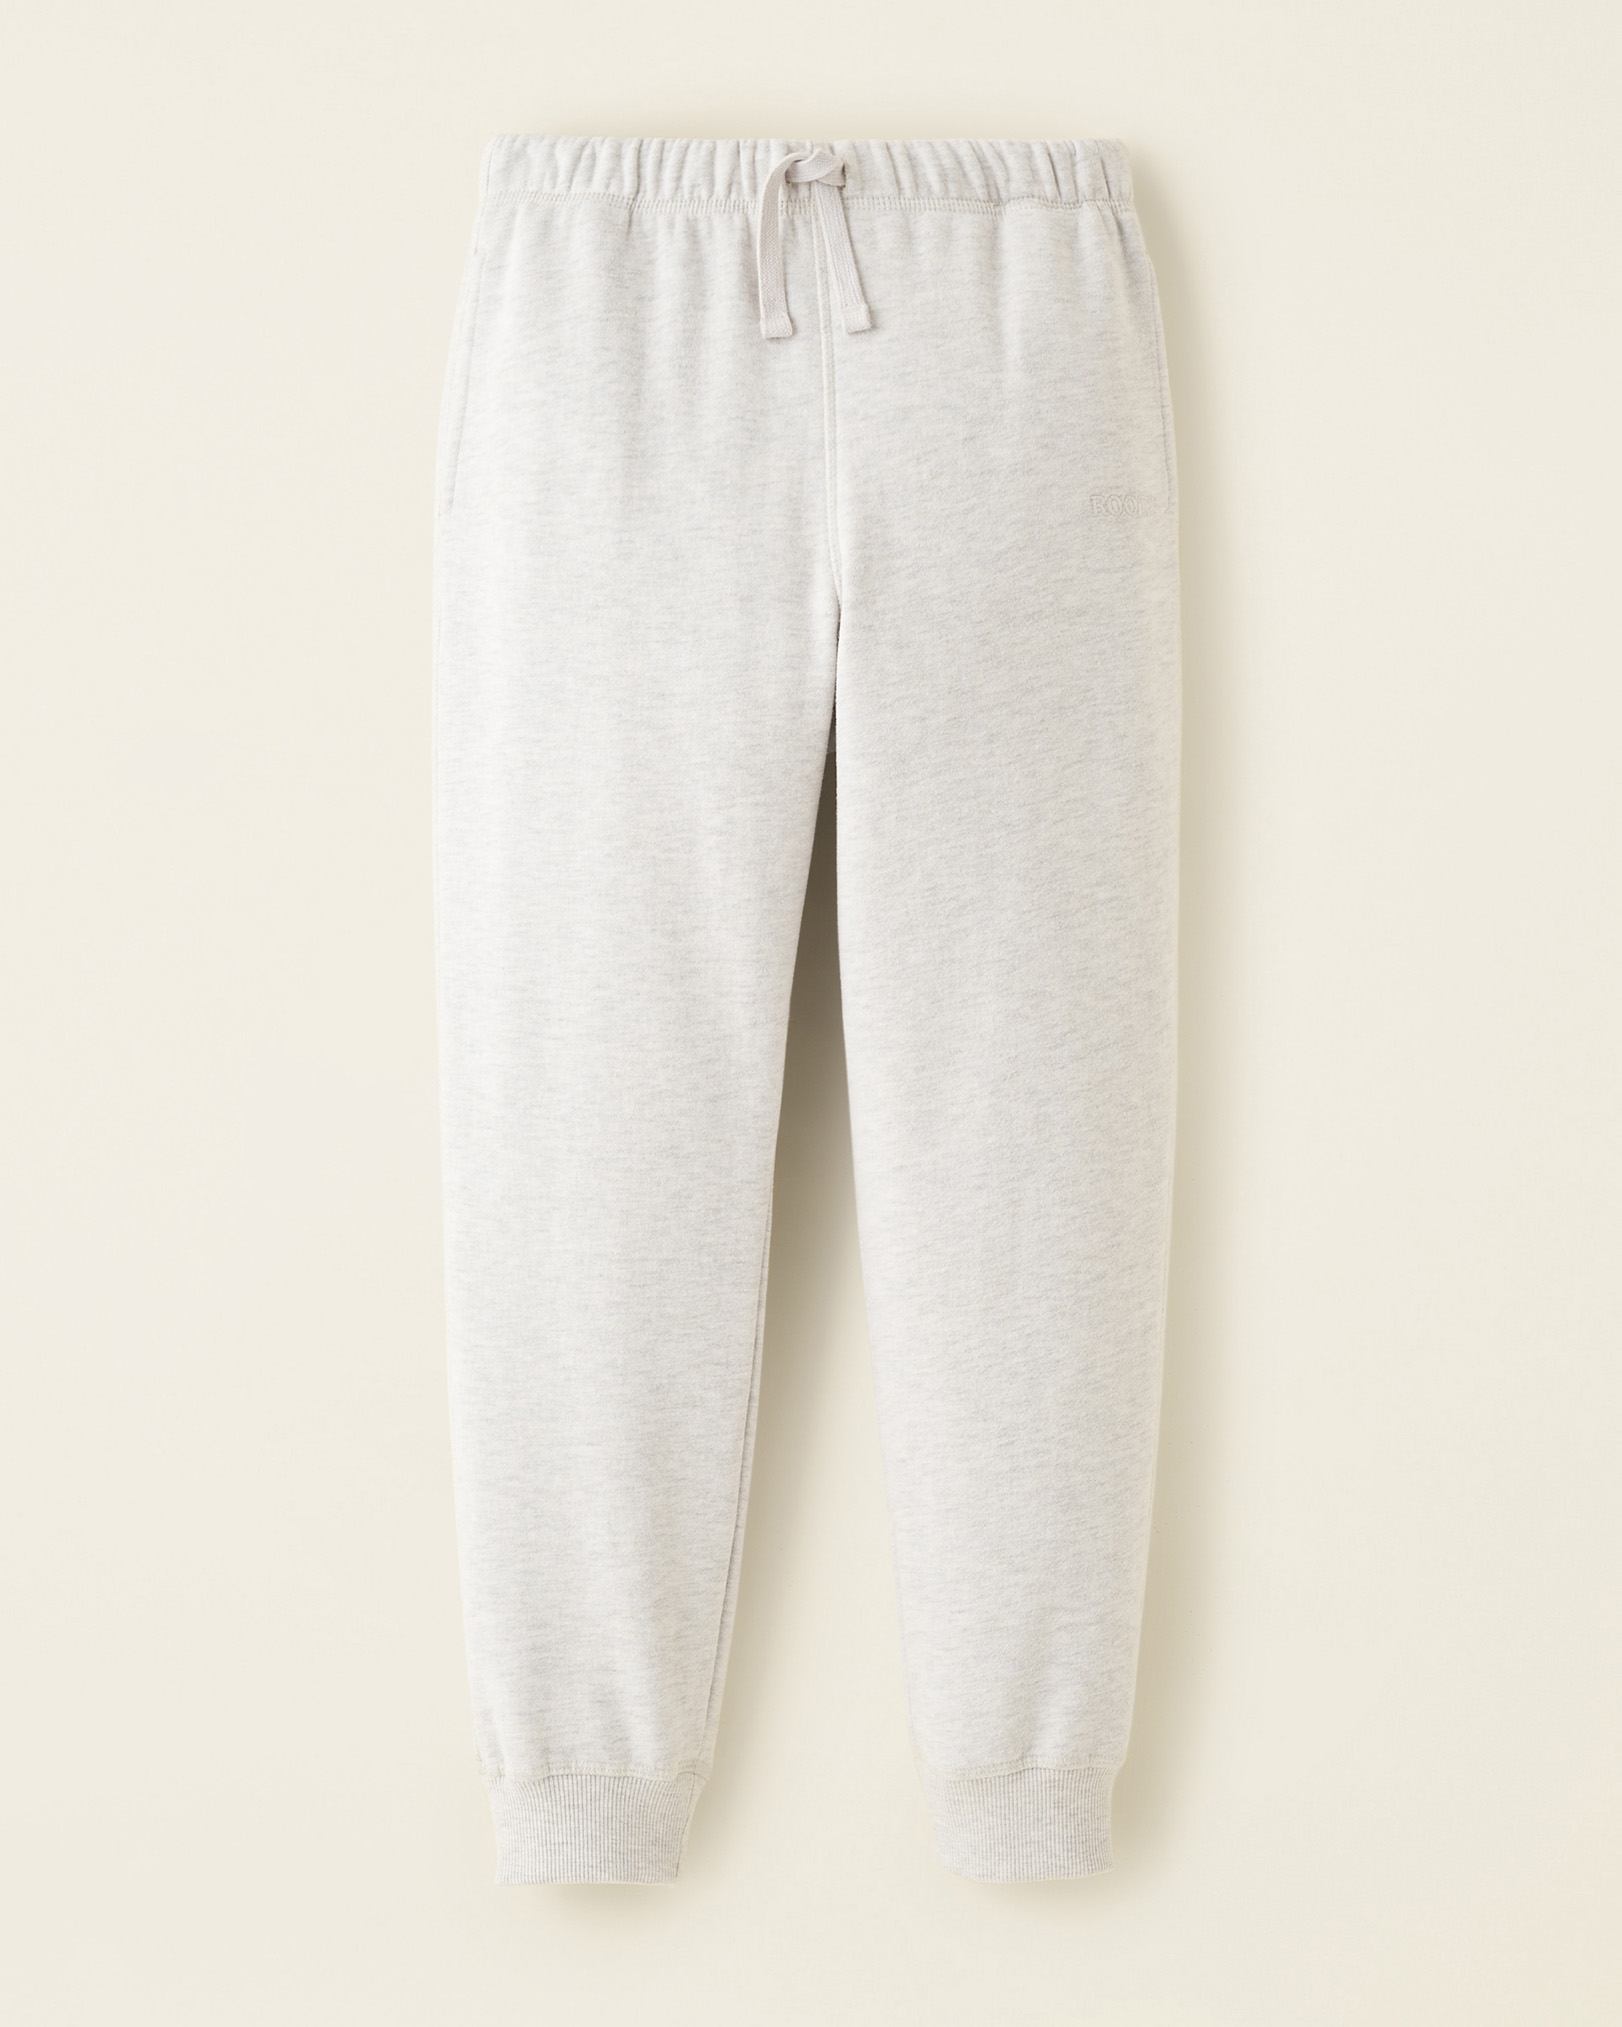 Roots Kids One Sweatpant in White Mix